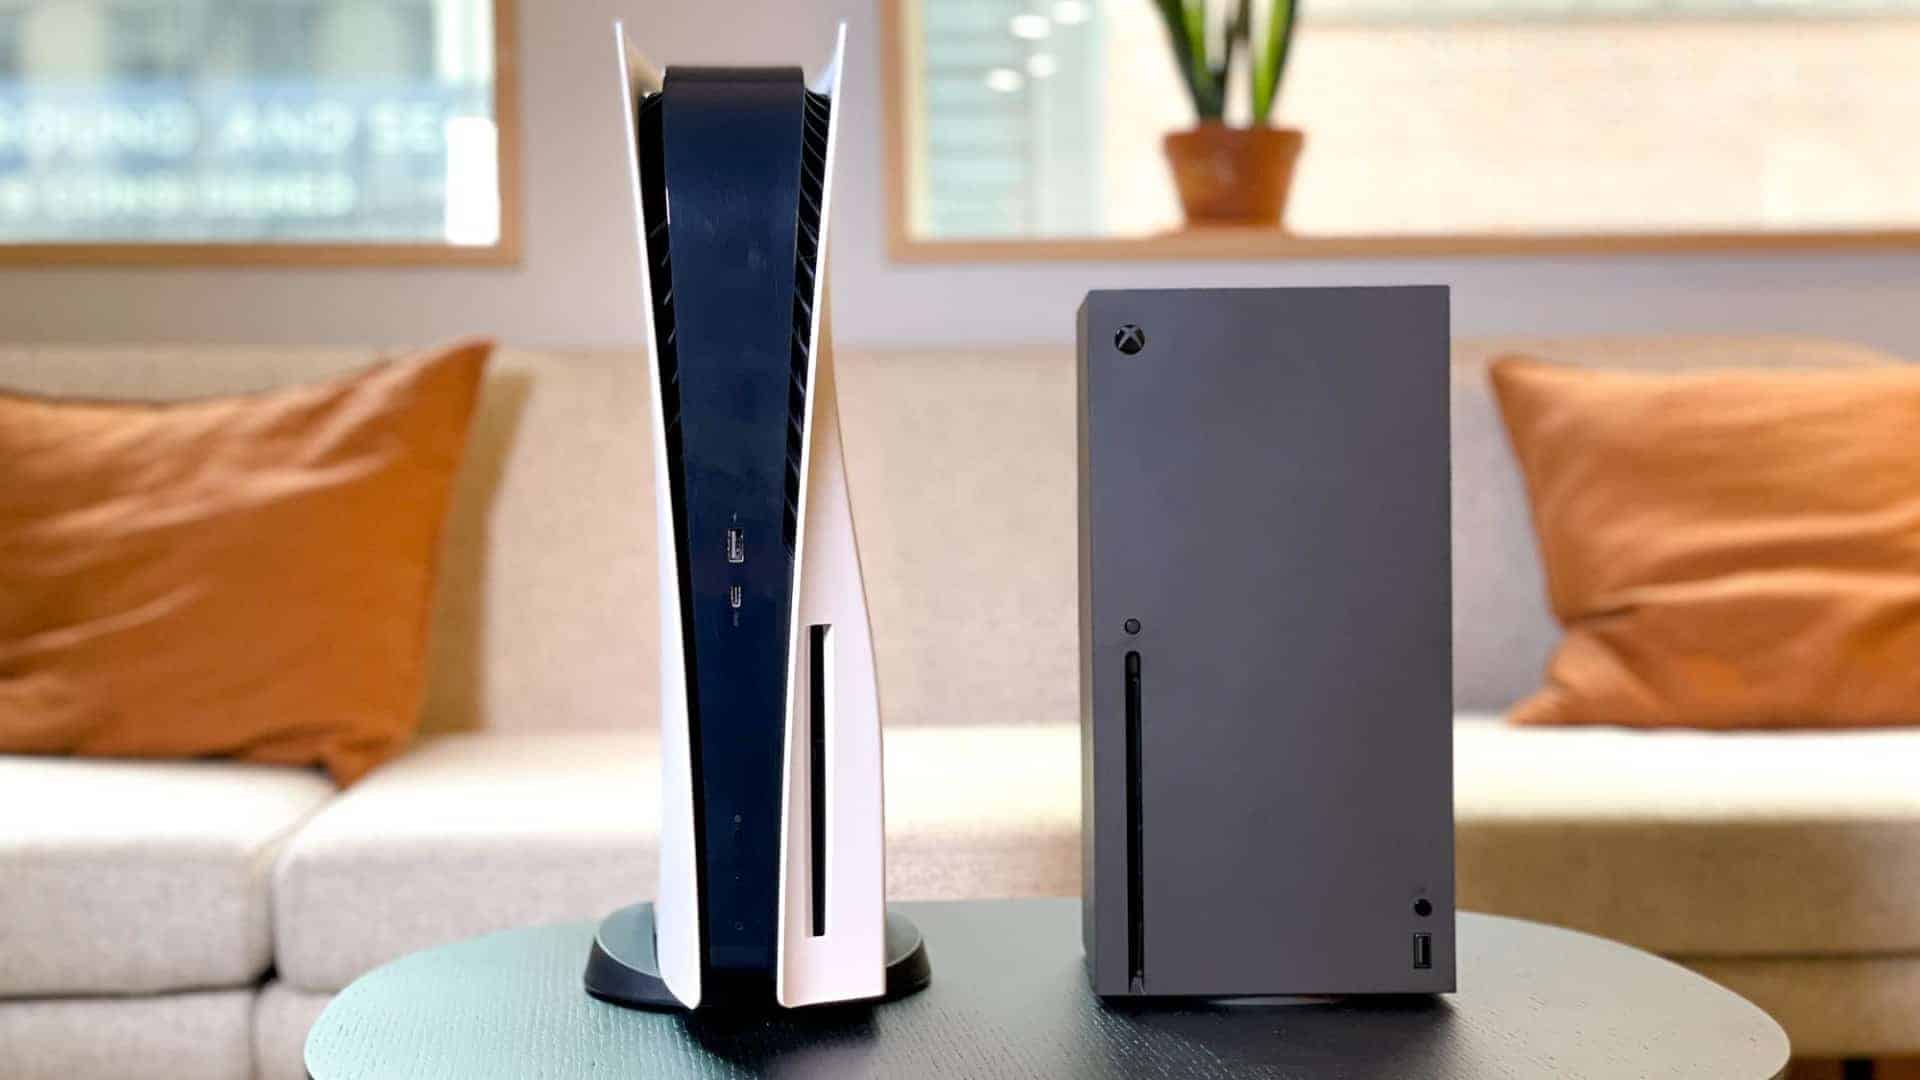 Xbox Series X & PlayStation 5 on Lounge Table